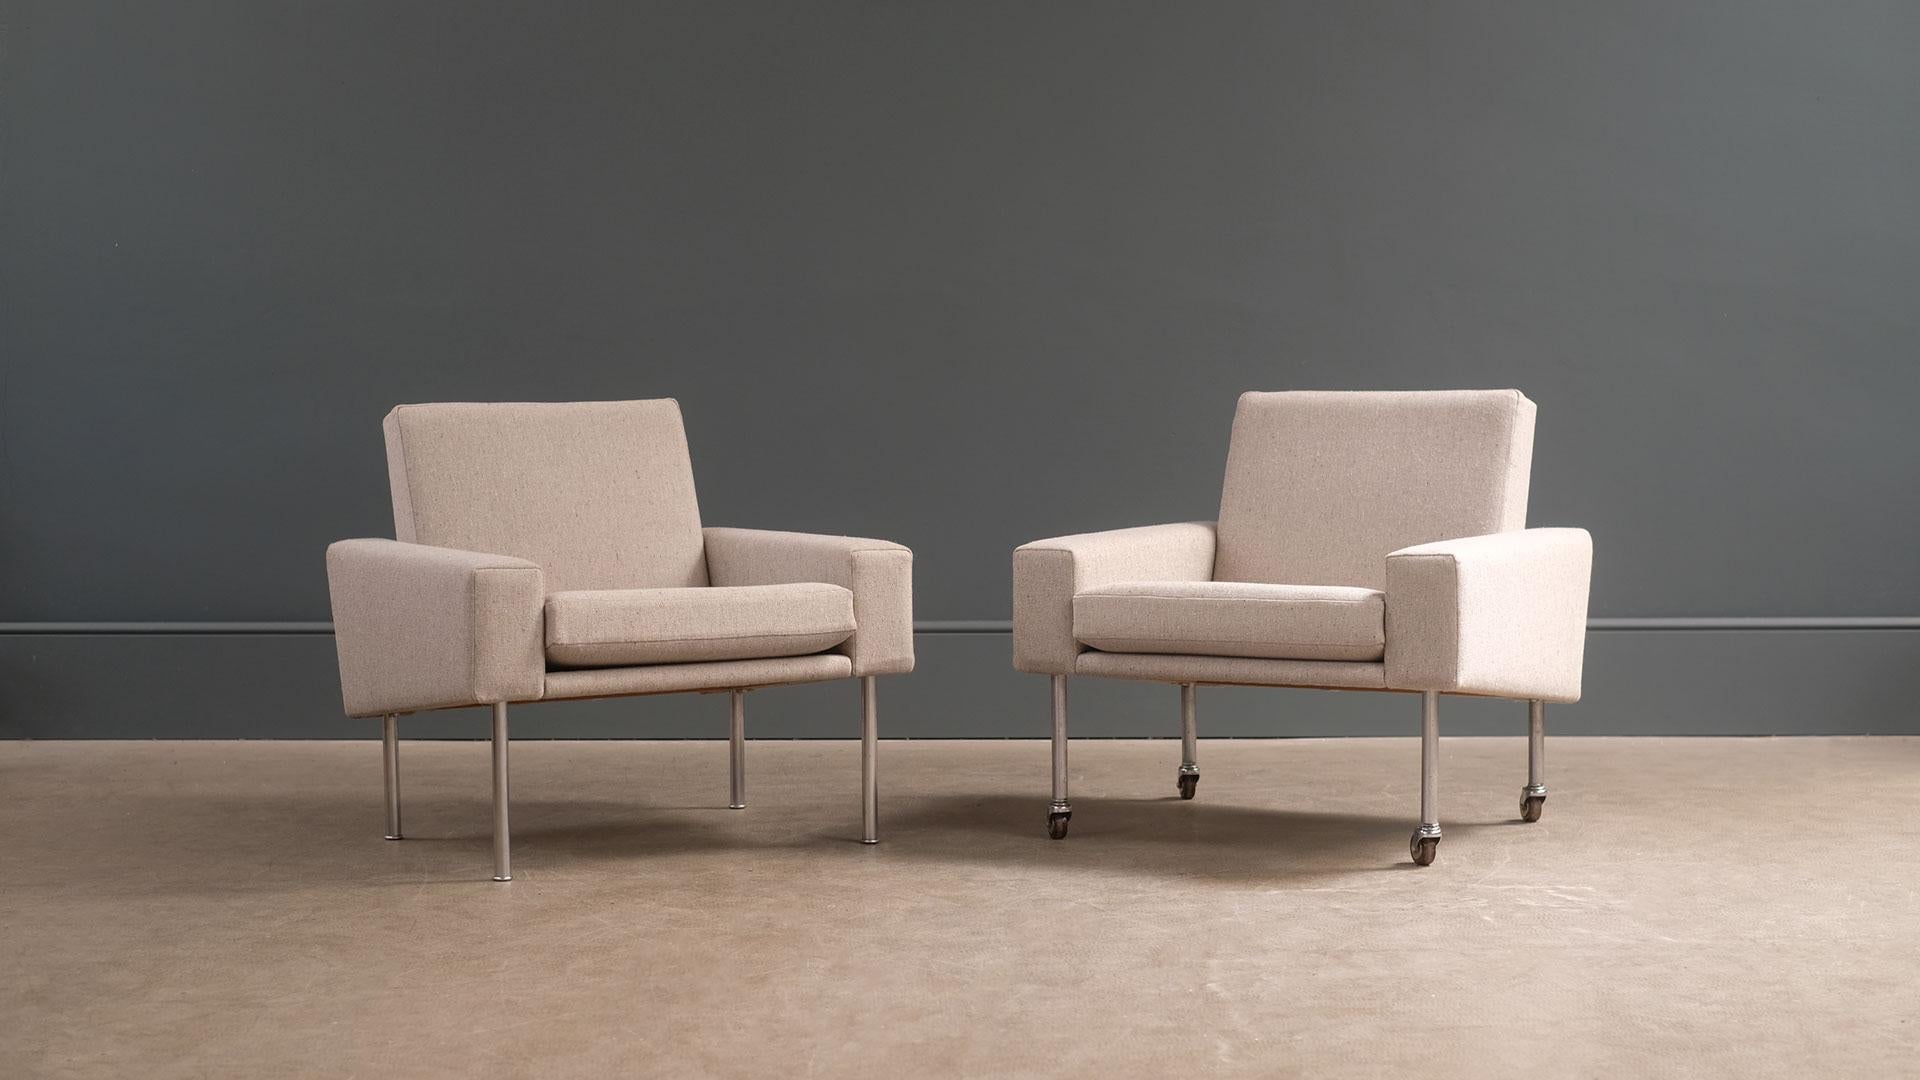 Fantastic pair of model AP34 armchairs designed by Hans Wegner for cabinetmaker A P Stolen, Denmark. Great looking and comfortable chairs fully reconditioned and reupholstered in Fleck fabric. Original configuration including one chair on wheels.